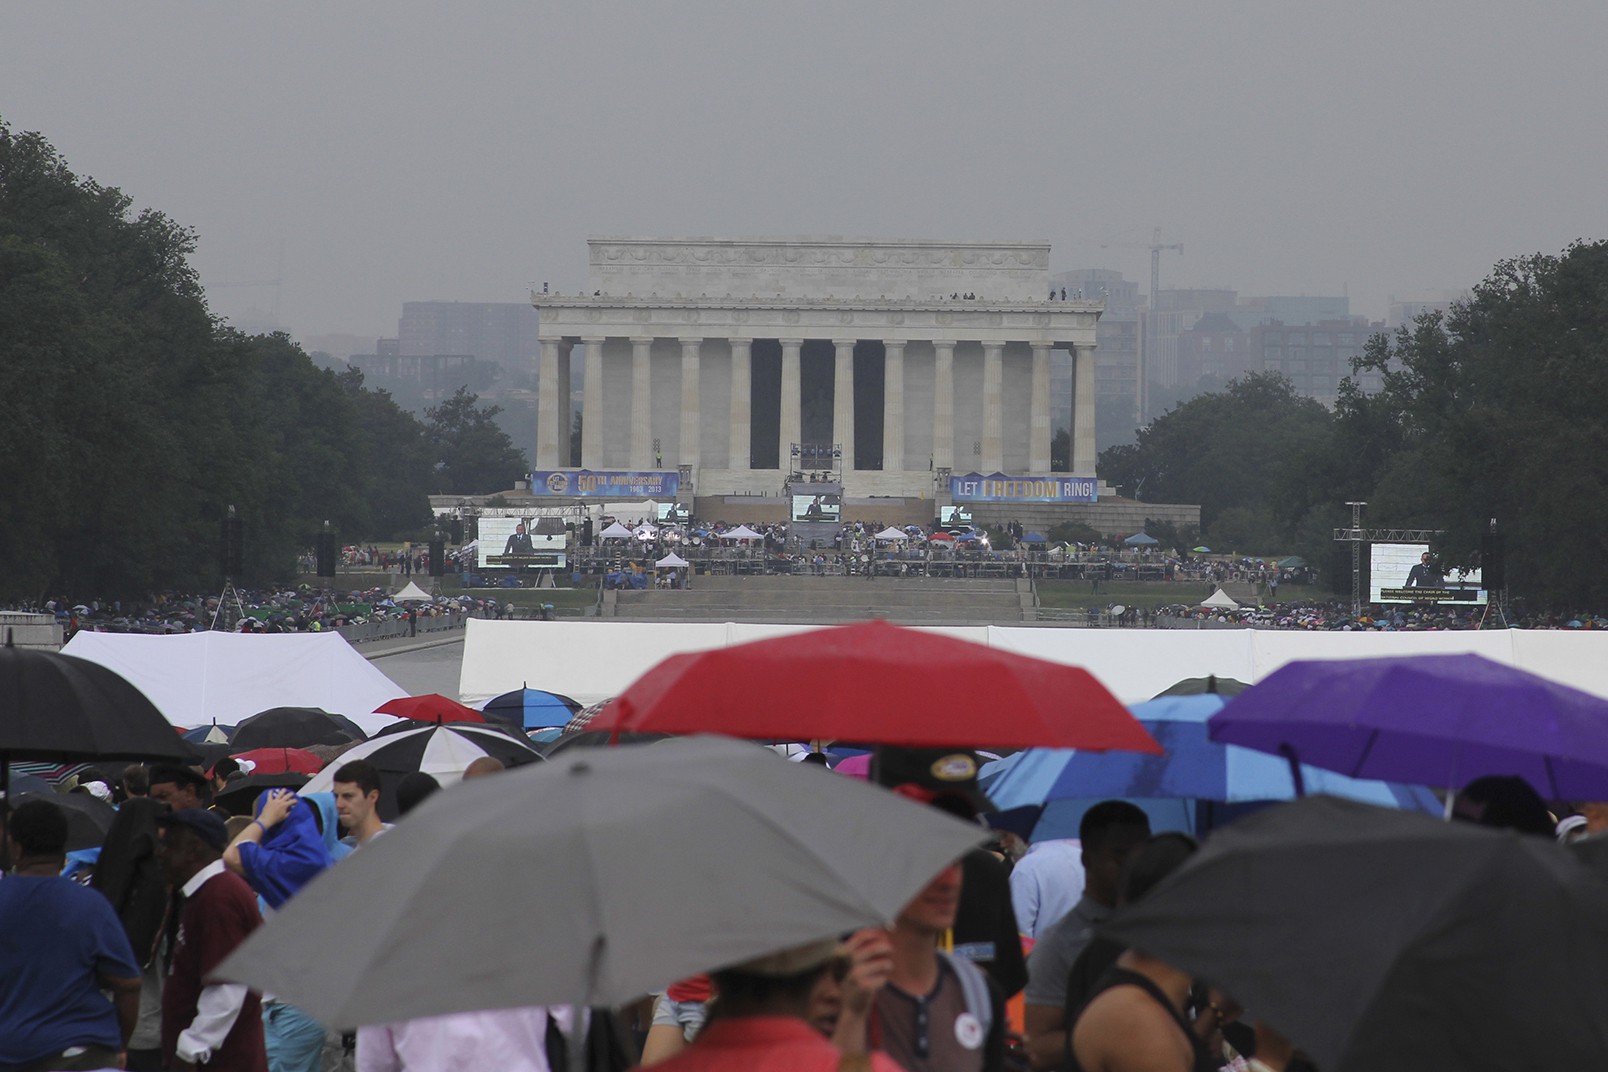 Thousands gathered around the Reflecting Pool under a rainy Washington sky to hear speeches from the Lincoln Memorial to mark the 50th anniversary of the historic March on Washington.